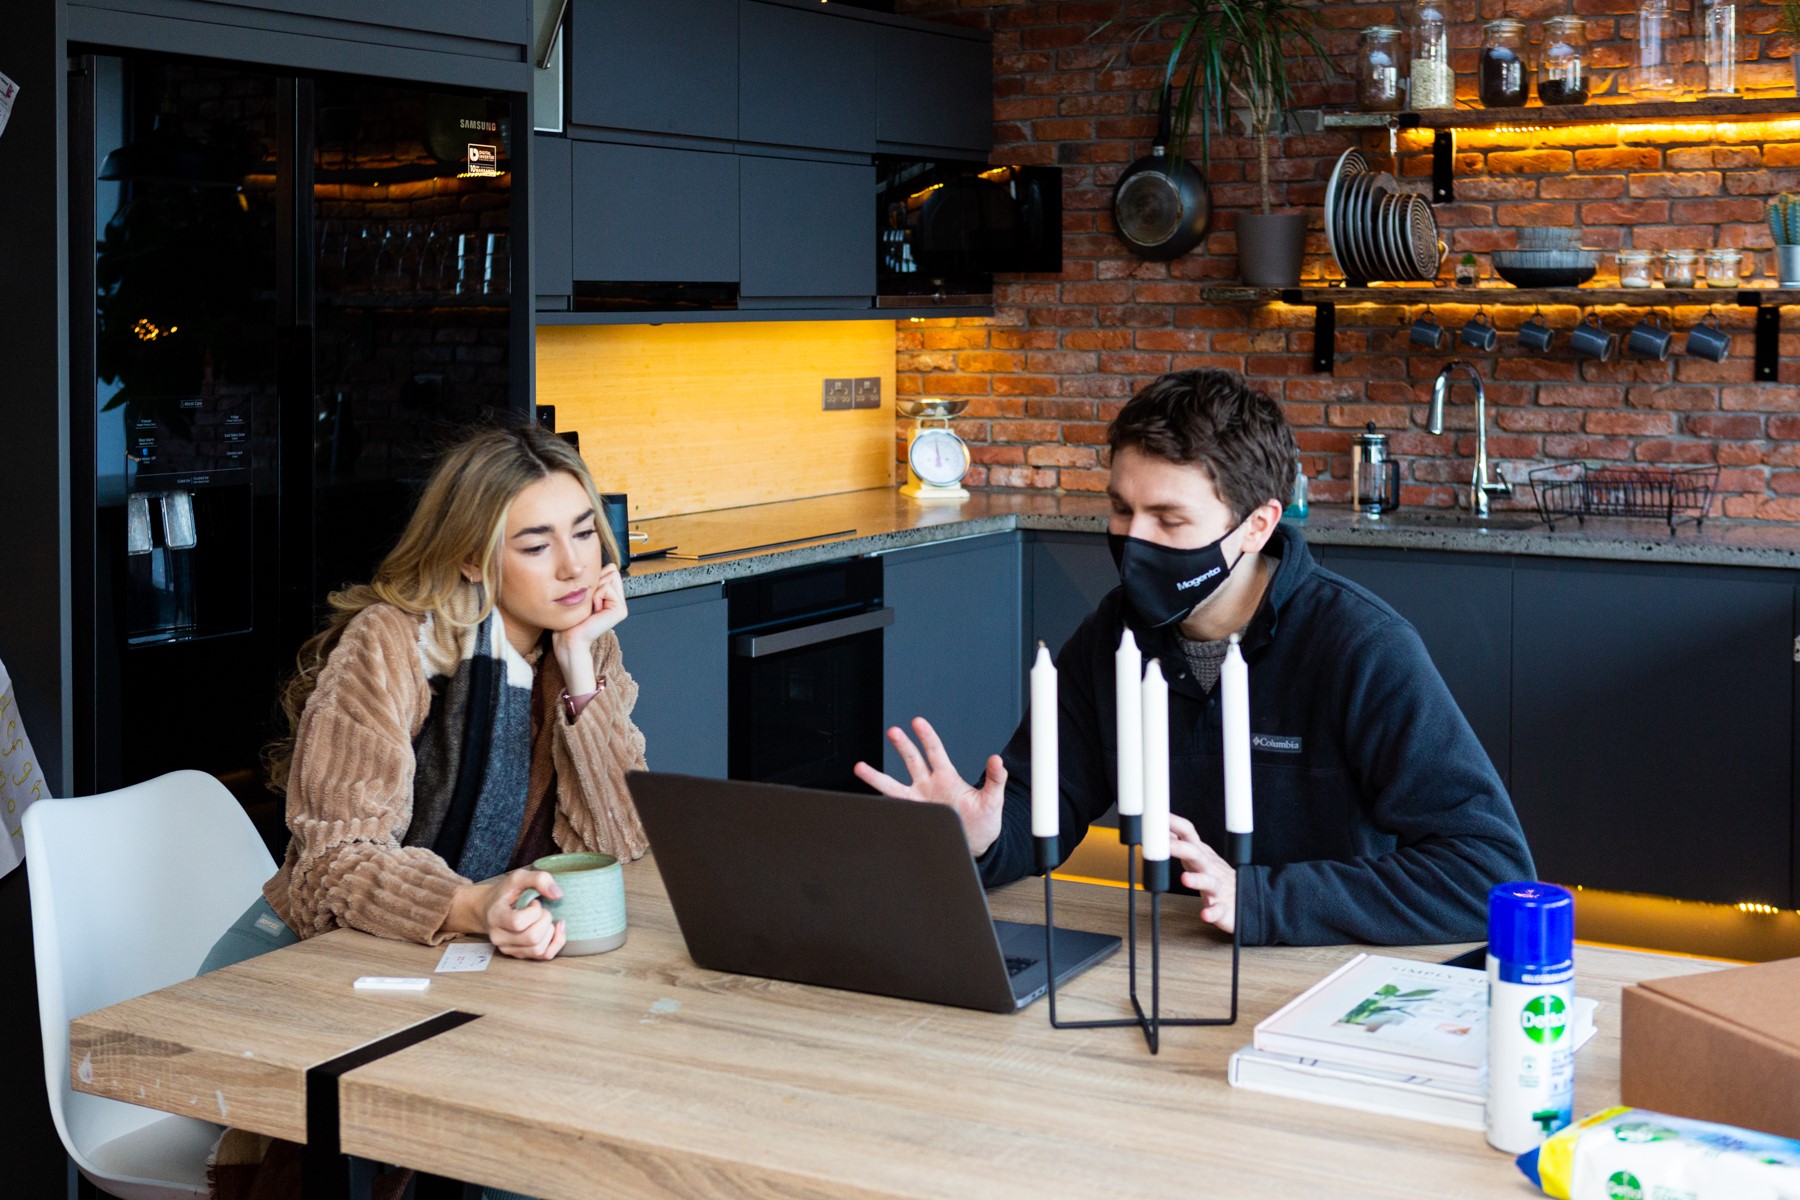 A member of our team wearing a face mask while talking to a client about what's on the computer screen